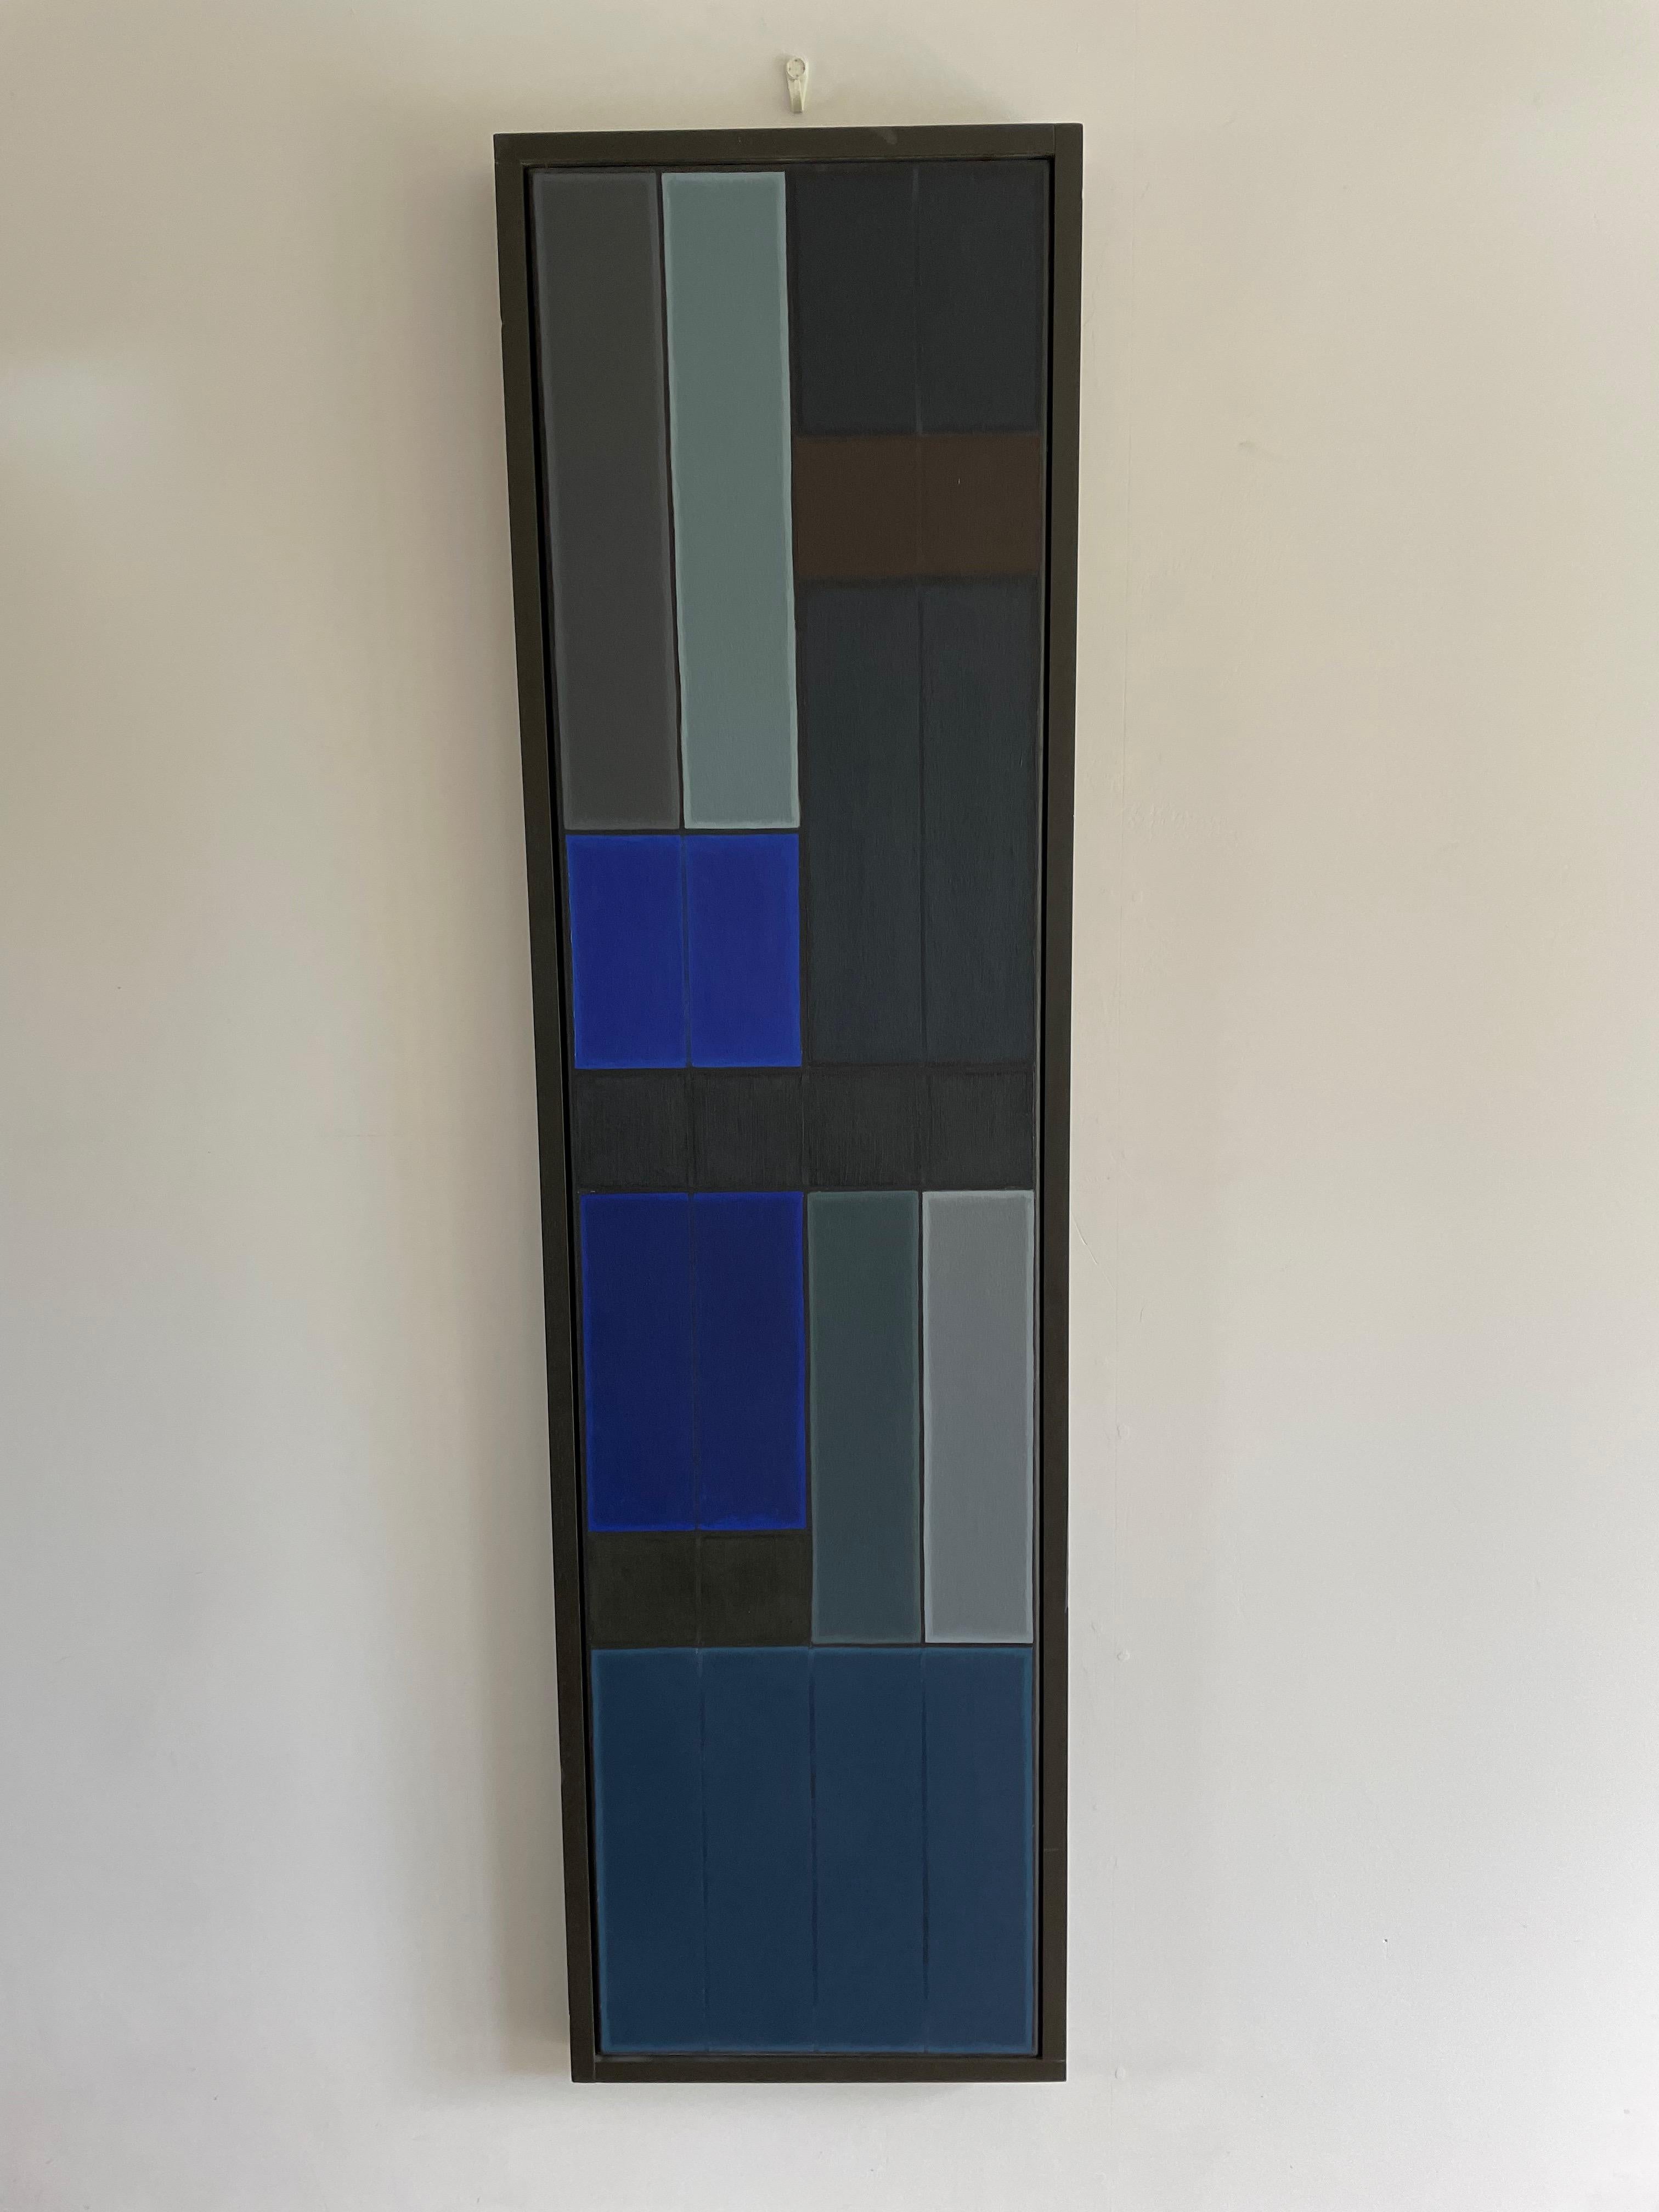 Untitled Blue Abstract Number 1.  Geometric Oil painting - Painting by John Hopwood